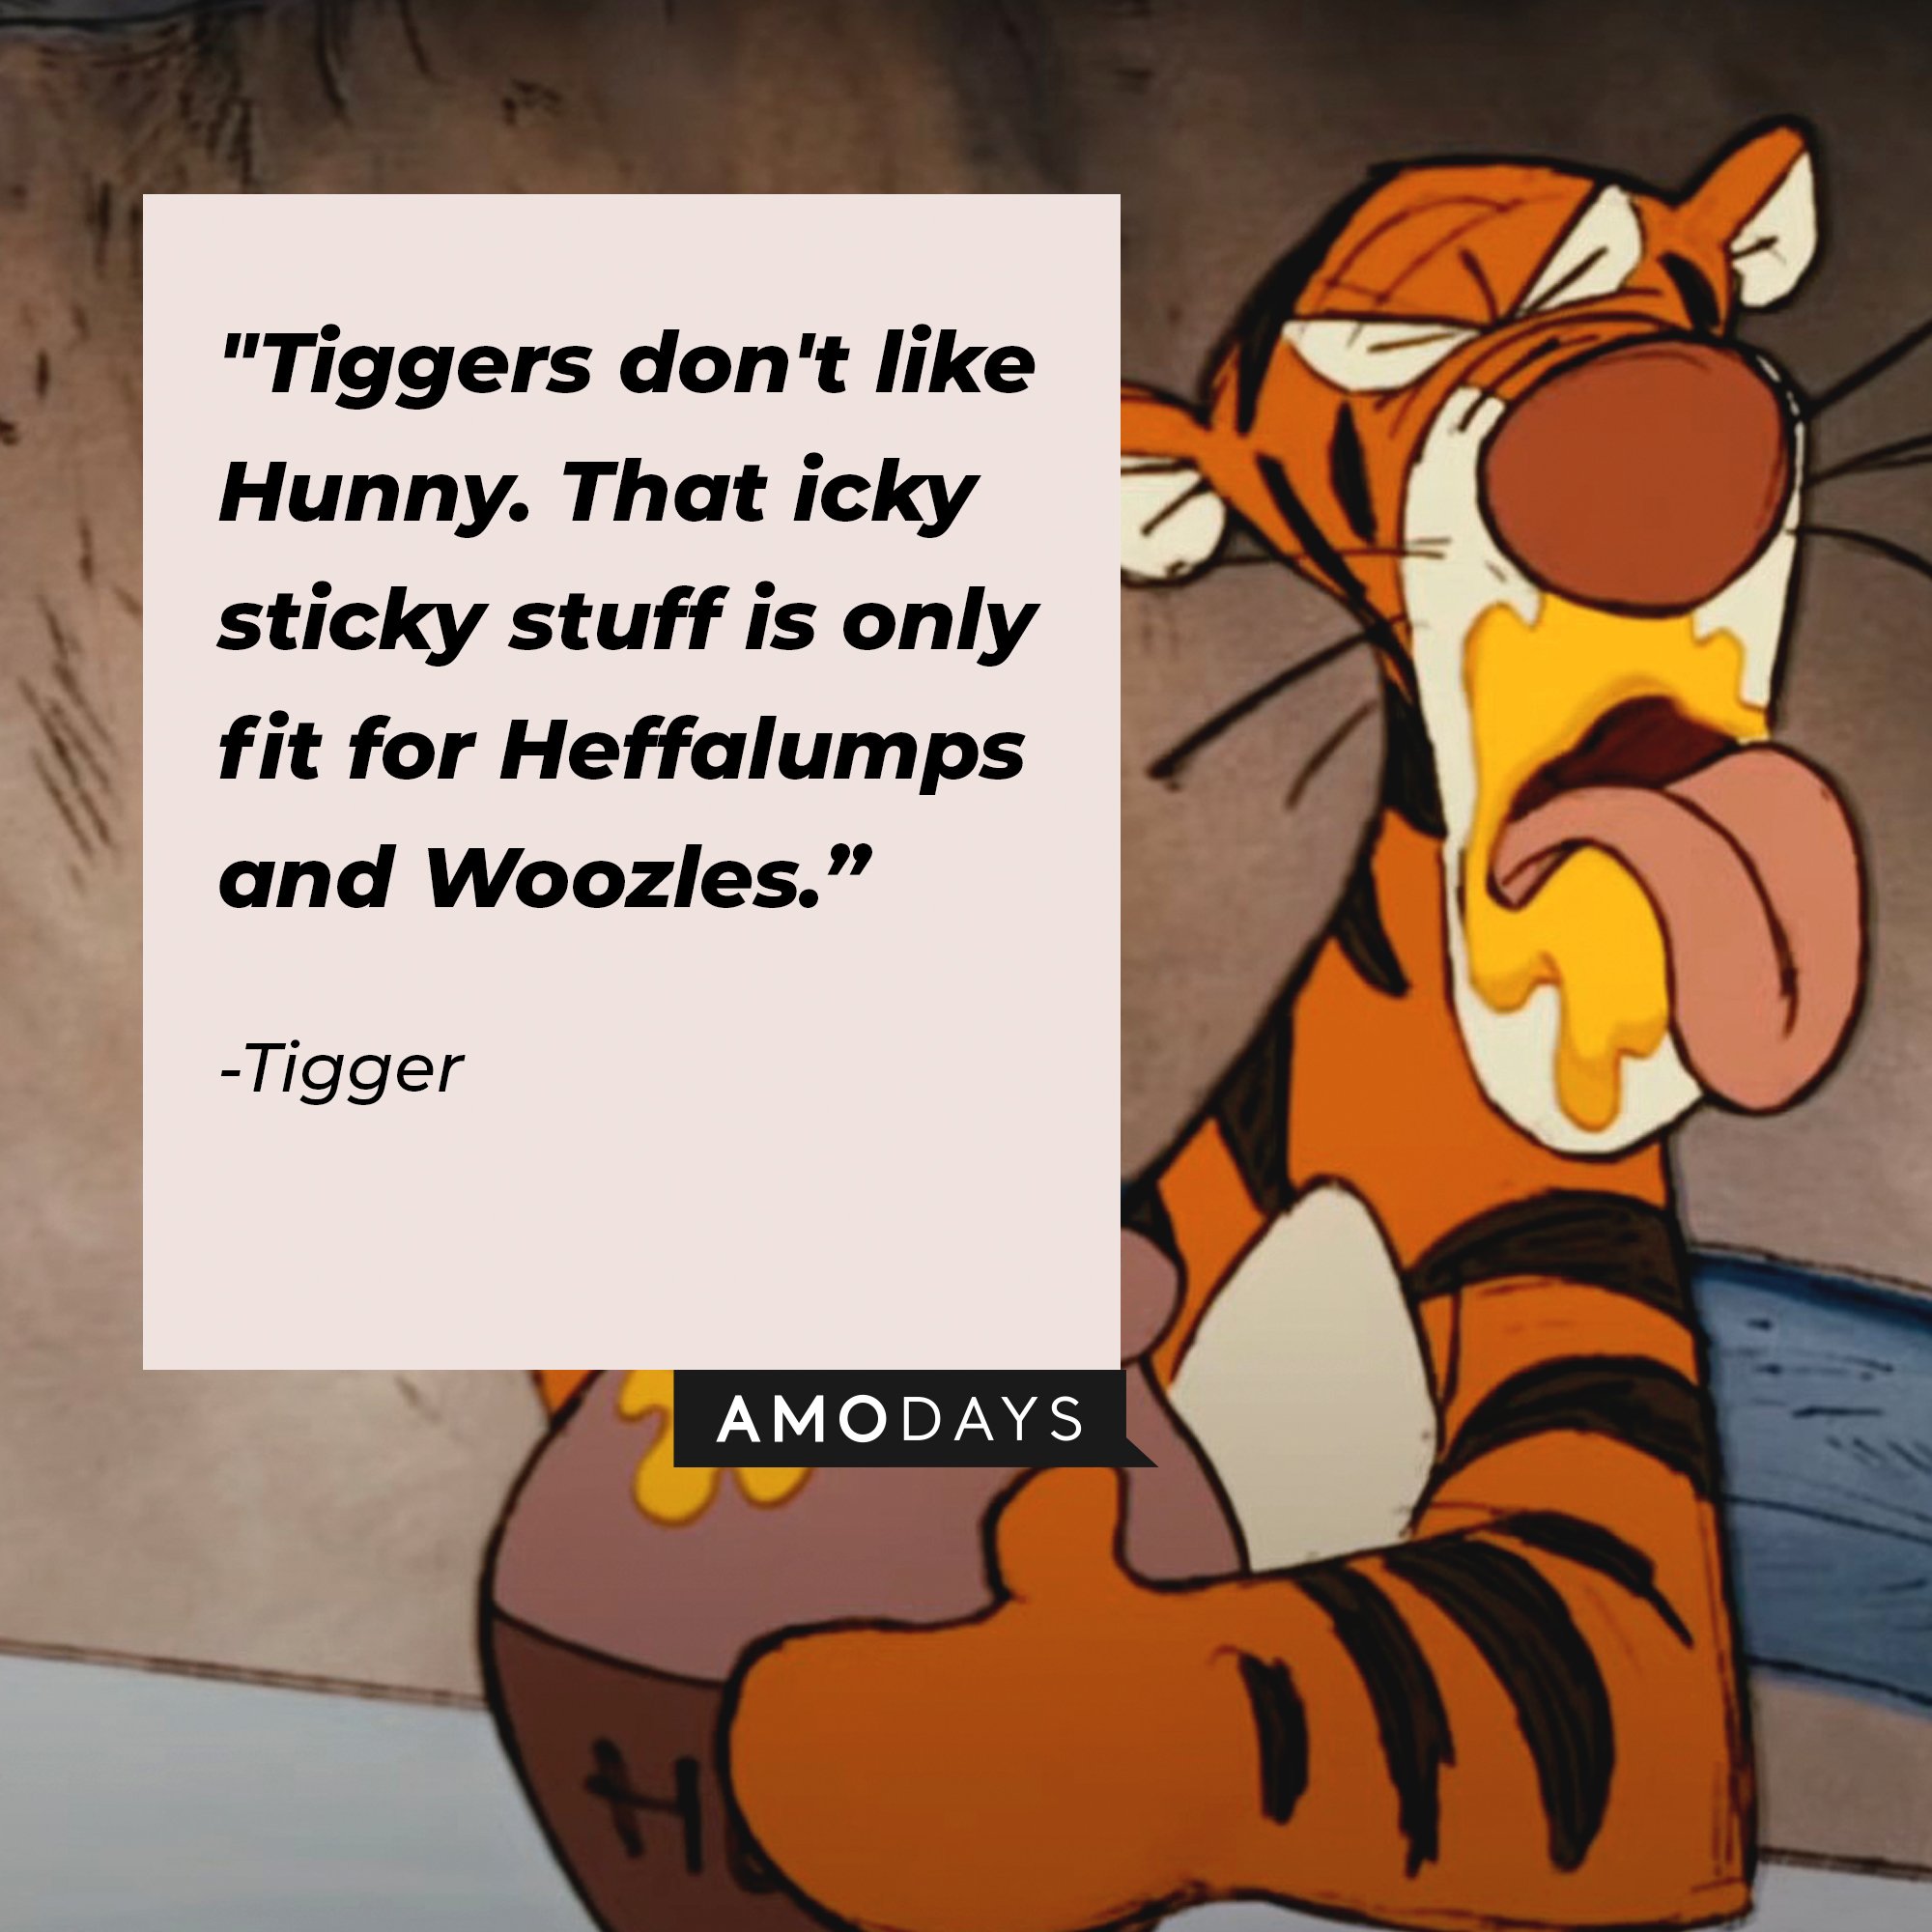 Tigger's quote: "Tiggers don't like Hunny. That icky sticky stuff is only fit for Heffalumps and Woozles." | Image: AmoDays